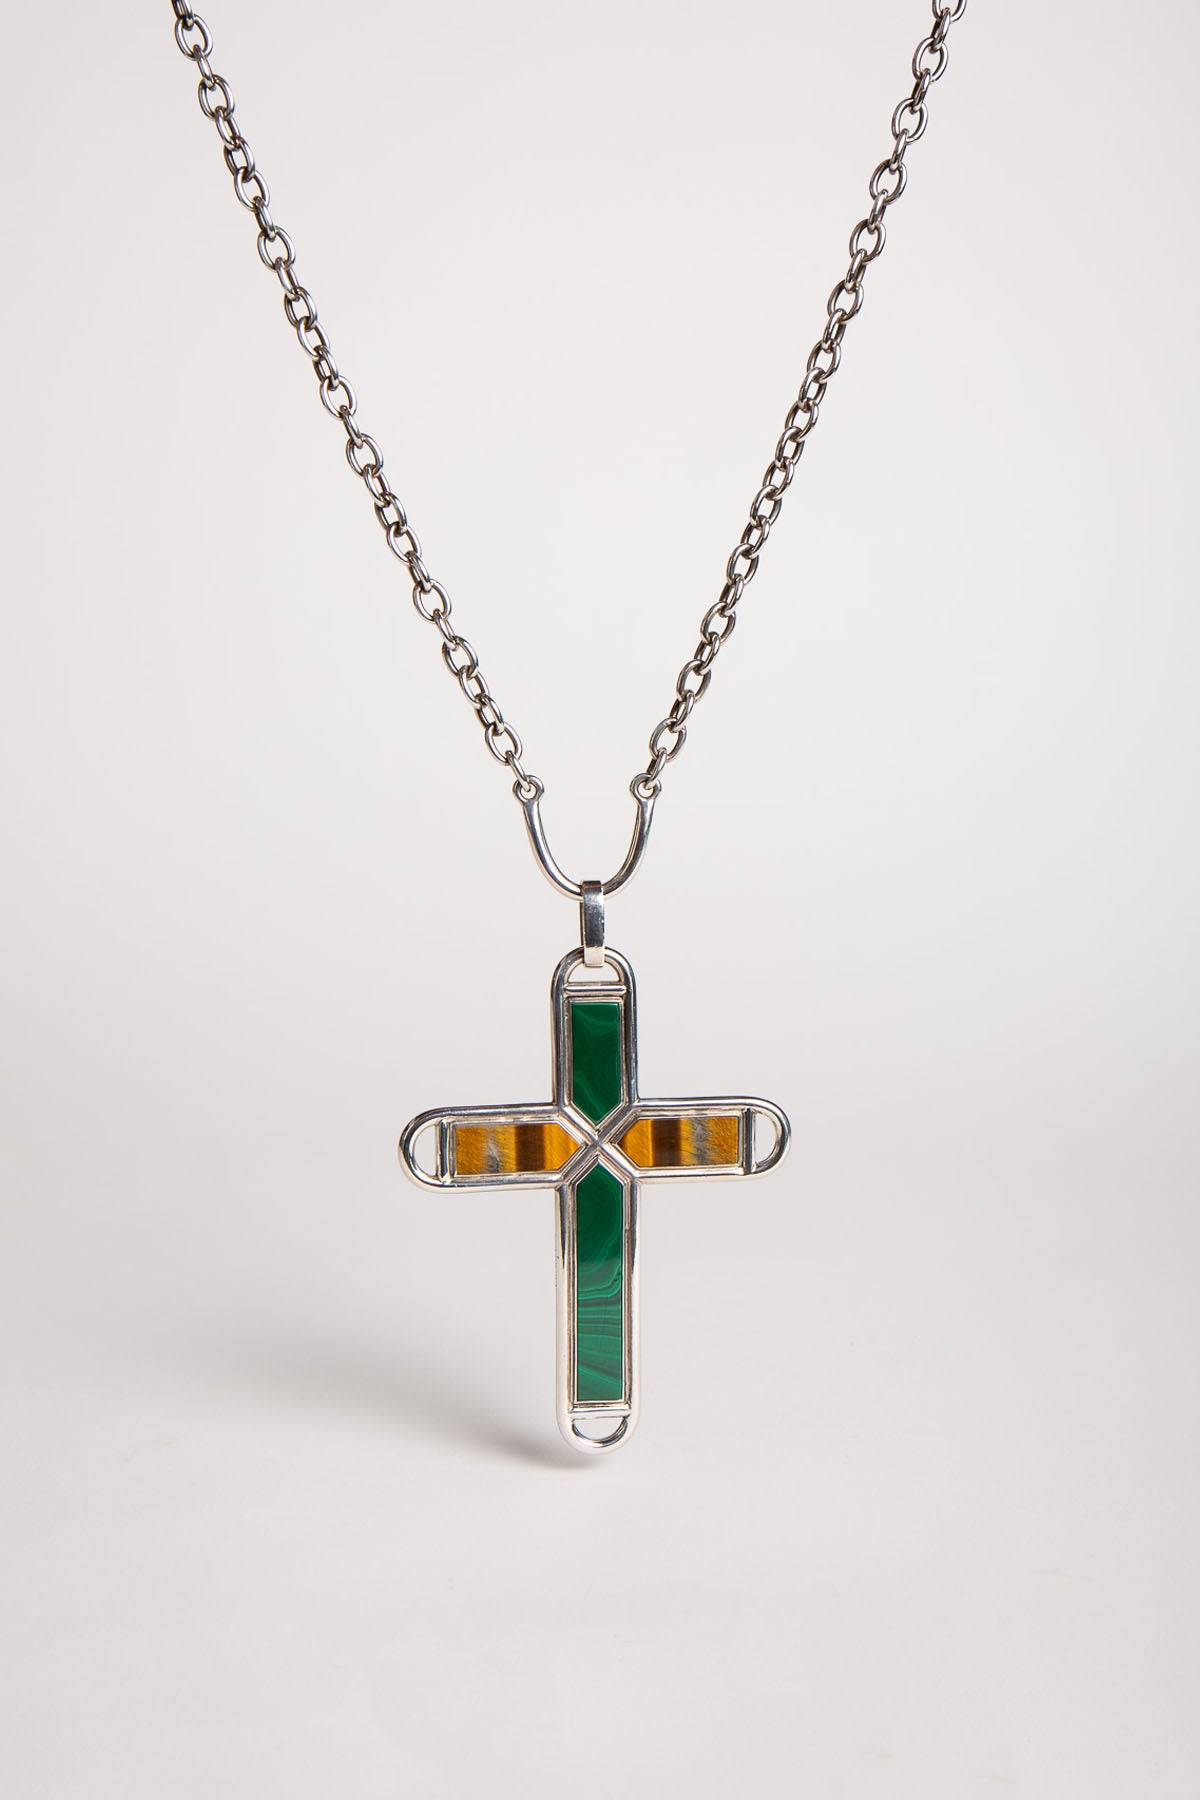 MAXFIELD PRIVATE COLLECTION | 1960'S AGATE CROSS NECKLACE